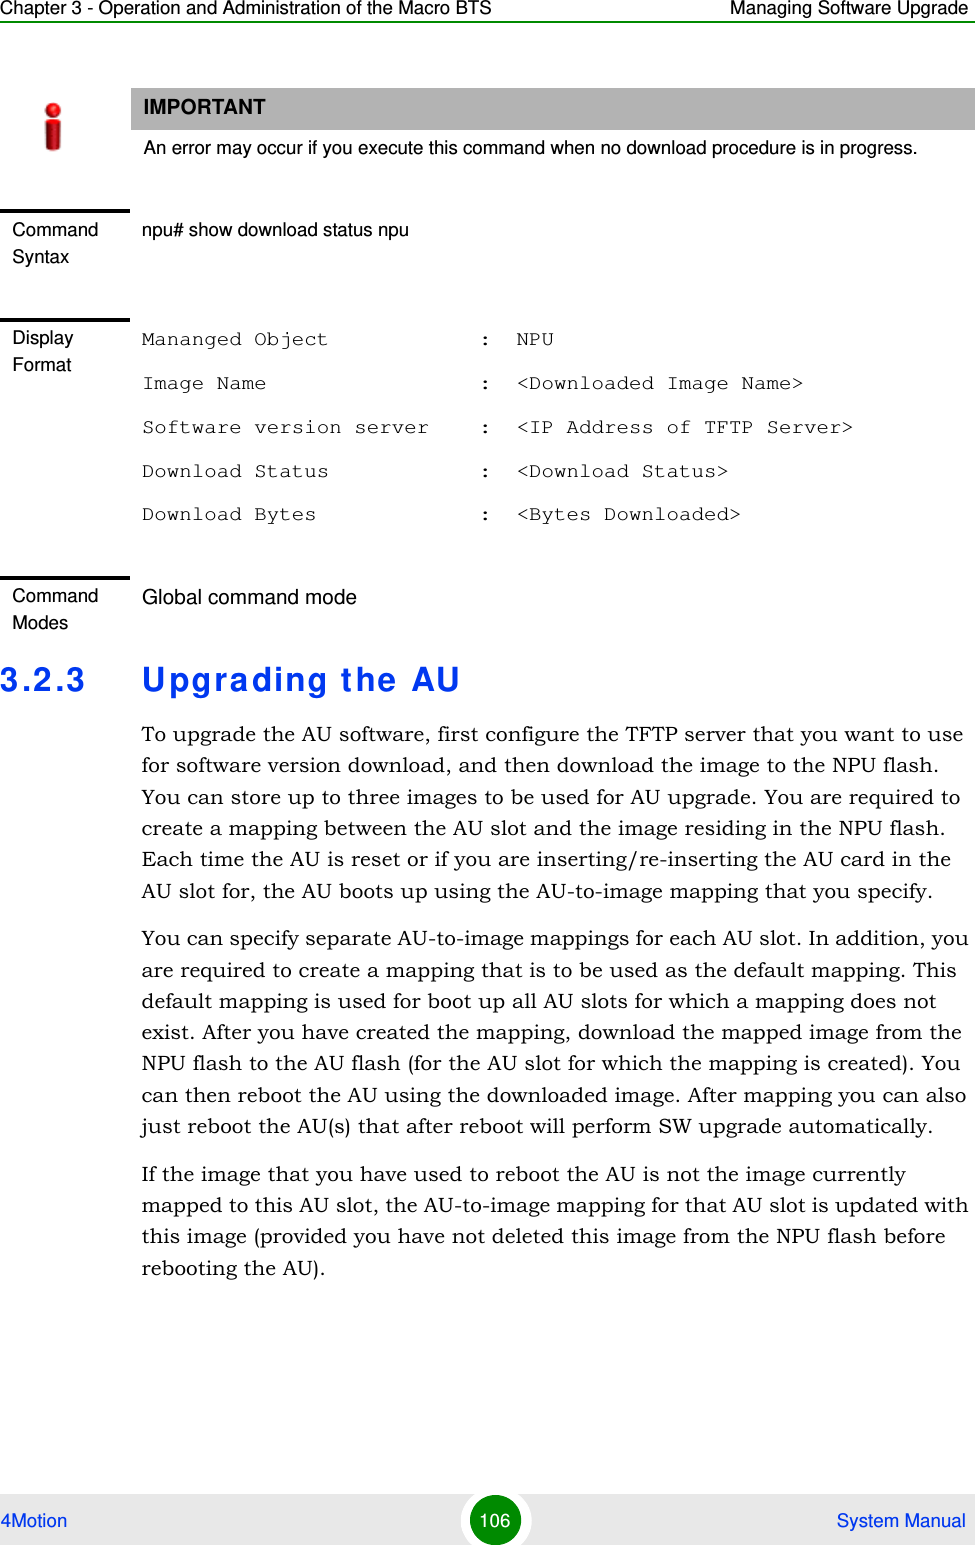 Chapter 3 - Operation and Administration of the Macro BTS Managing Software Upgrade4Motion 106  System Manual3.2.3 Upgrading the AUTo upgrade the AU software, first configure the TFTP server that you want to use for software version download, and then download the image to the NPU flash. You can store up to three images to be used for AU upgrade. You are required to create a mapping between the AU slot and the image residing in the NPU flash. Each time the AU is reset or if you are inserting/re-inserting the AU card in the AU slot for, the AU boots up using the AU-to-image mapping that you specify.You can specify separate AU-to-image mappings for each AU slot. In addition, you are required to create a mapping that is to be used as the default mapping. This default mapping is used for boot up all AU slots for which a mapping does not exist. After you have created the mapping, download the mapped image from the NPU flash to the AU flash (for the AU slot for which the mapping is created). You can then reboot the AU using the downloaded image. After mapping you can also just reboot the AU(s) that after reboot will perform SW upgrade automatically.If the image that you have used to reboot the AU is not the image currently mapped to this AU slot, the AU-to-image mapping for that AU slot is updated with this image (provided you have not deleted this image from the NPU flash before rebooting the AU).IMPORTANTAn error may occur if you execute this command when no download procedure is in progress.Command Syntaxnpu# show download status npuDisplay FormatMananged Object            :  NPUImage Name                 :  &lt;Downloaded Image Name&gt;Software version server    :  &lt;IP Address of TFTP Server&gt;Download Status            :  &lt;Download Status&gt;Download Bytes             :  &lt;Bytes Downloaded&gt;Command ModesGlobal command mode